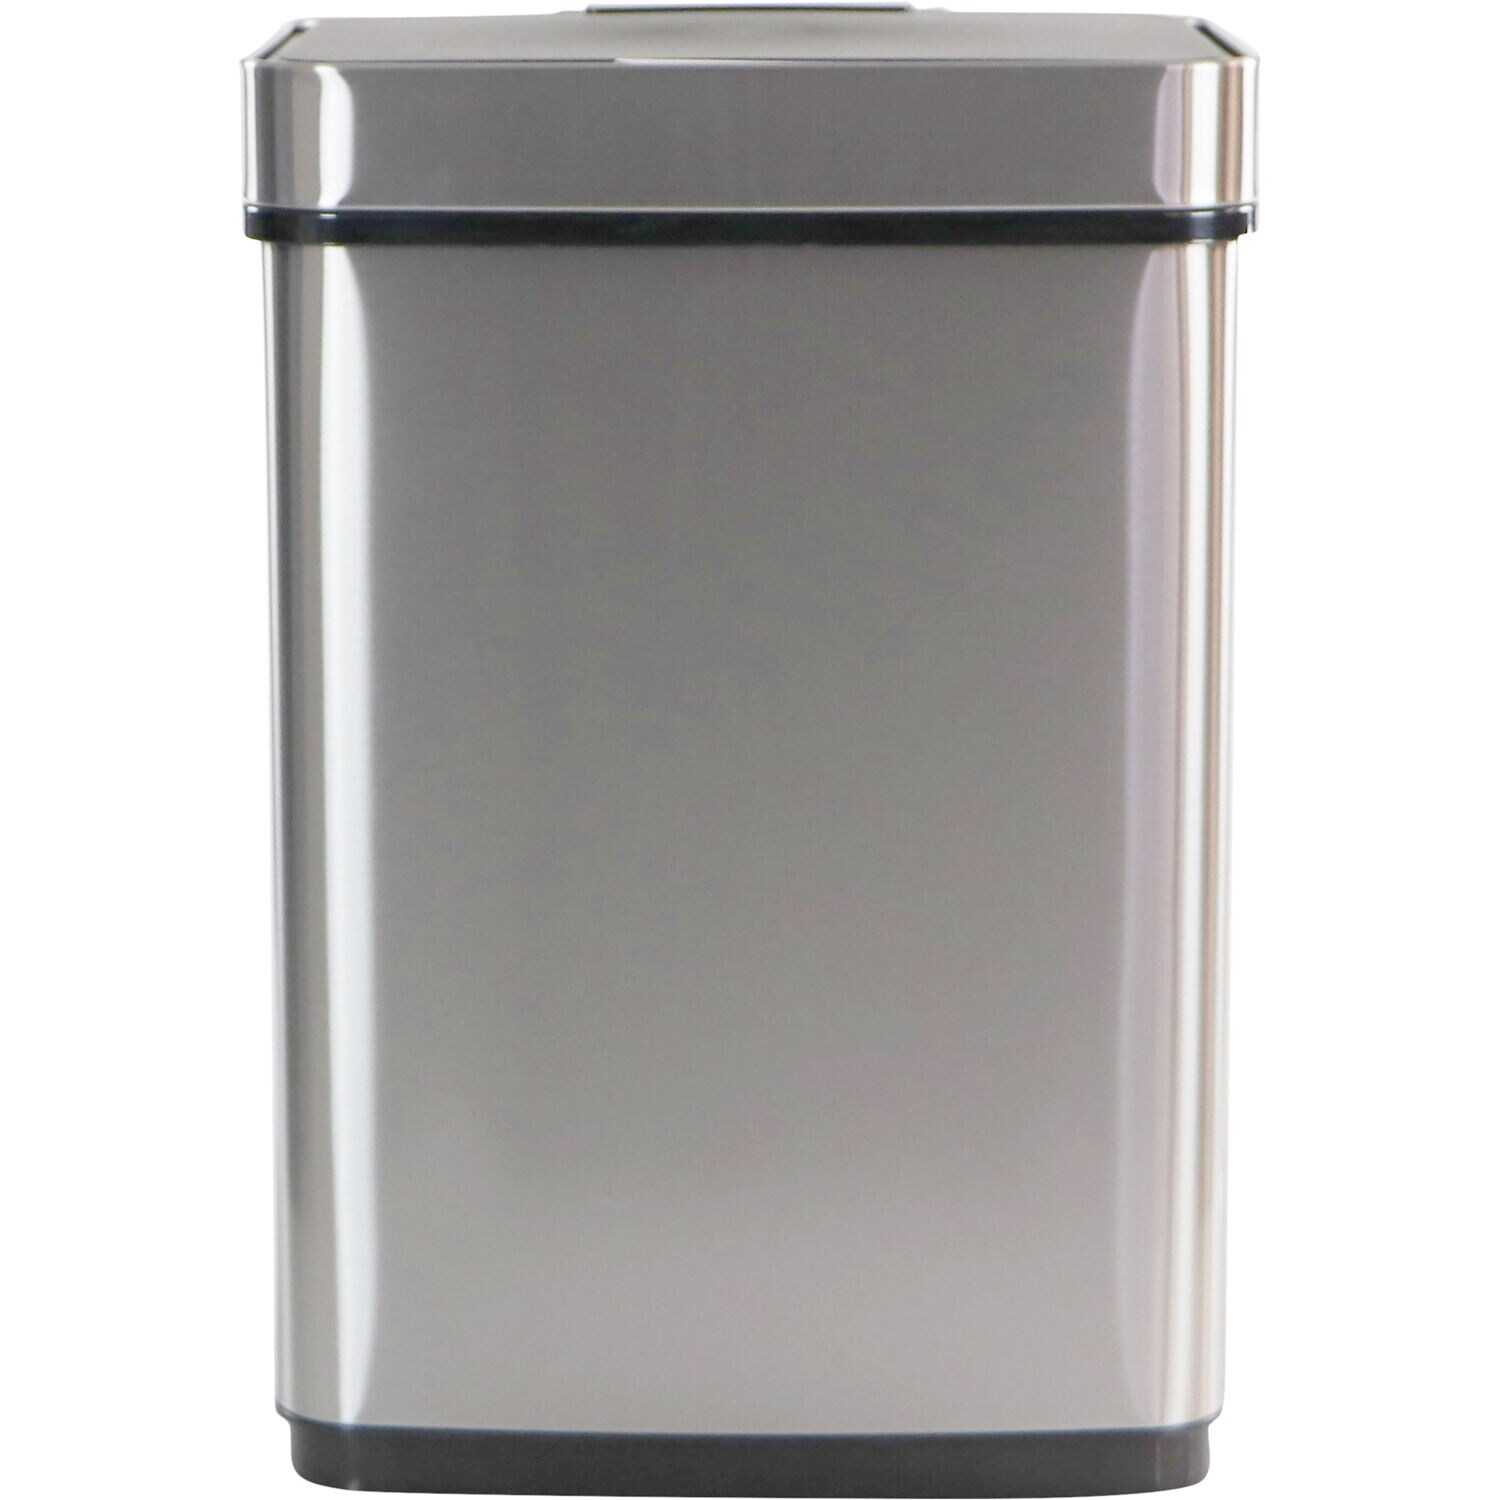 Stainless Steel Mini Garbage Bin Cover Trash Can Waste Container Office Bar 